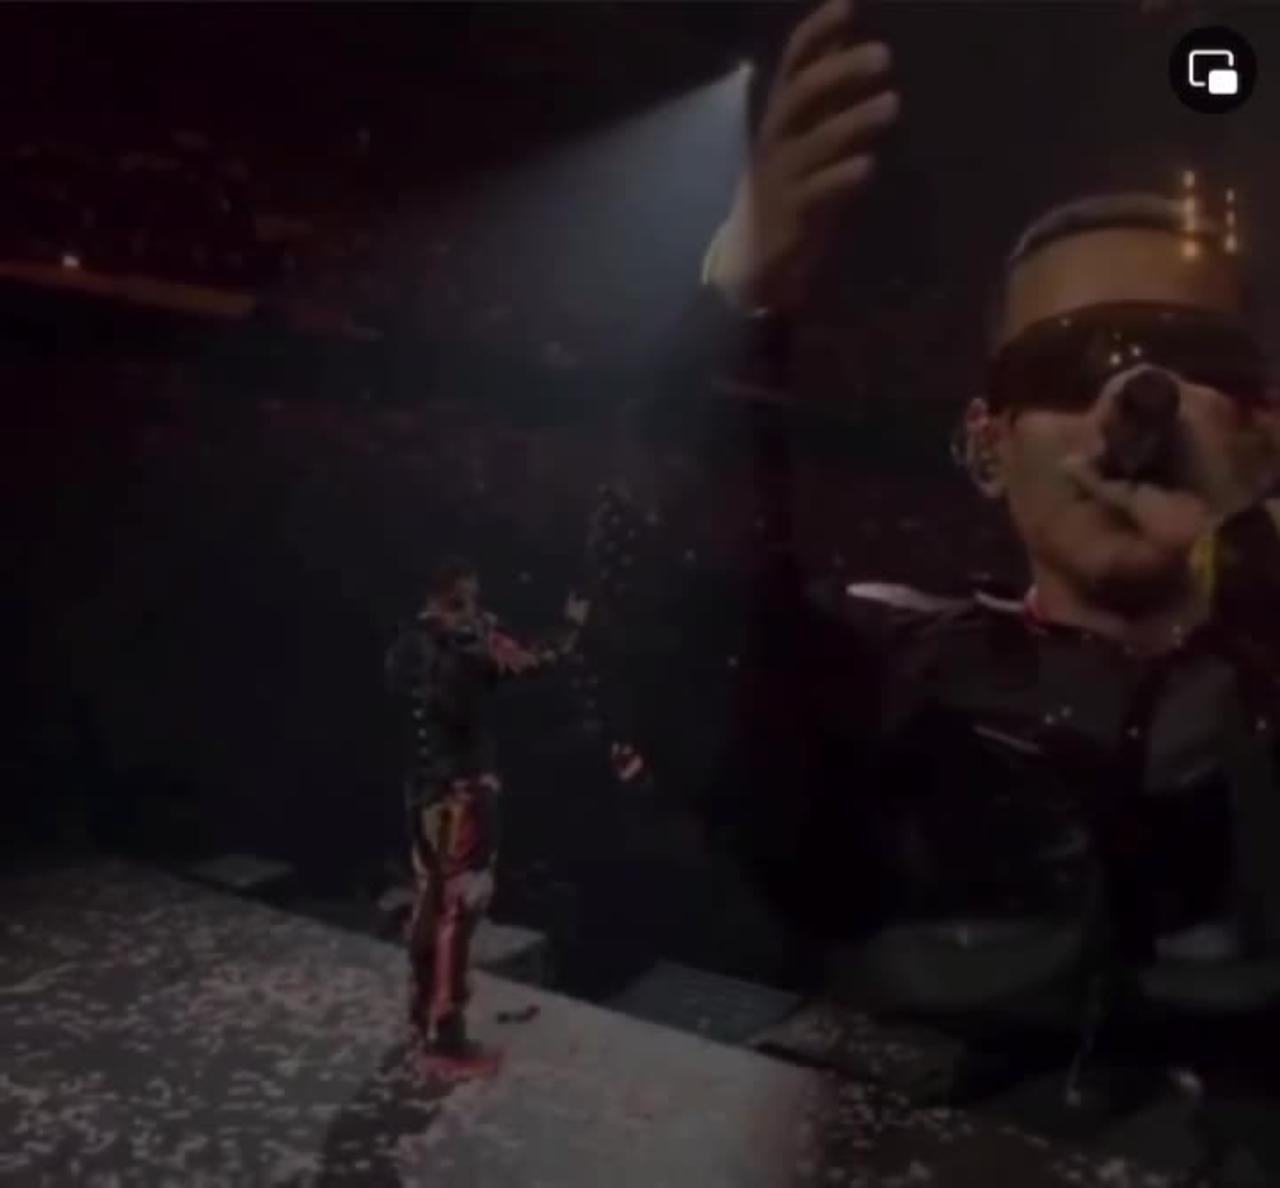 Daddy Yankee gives his life to Jesus Christ in his last concert